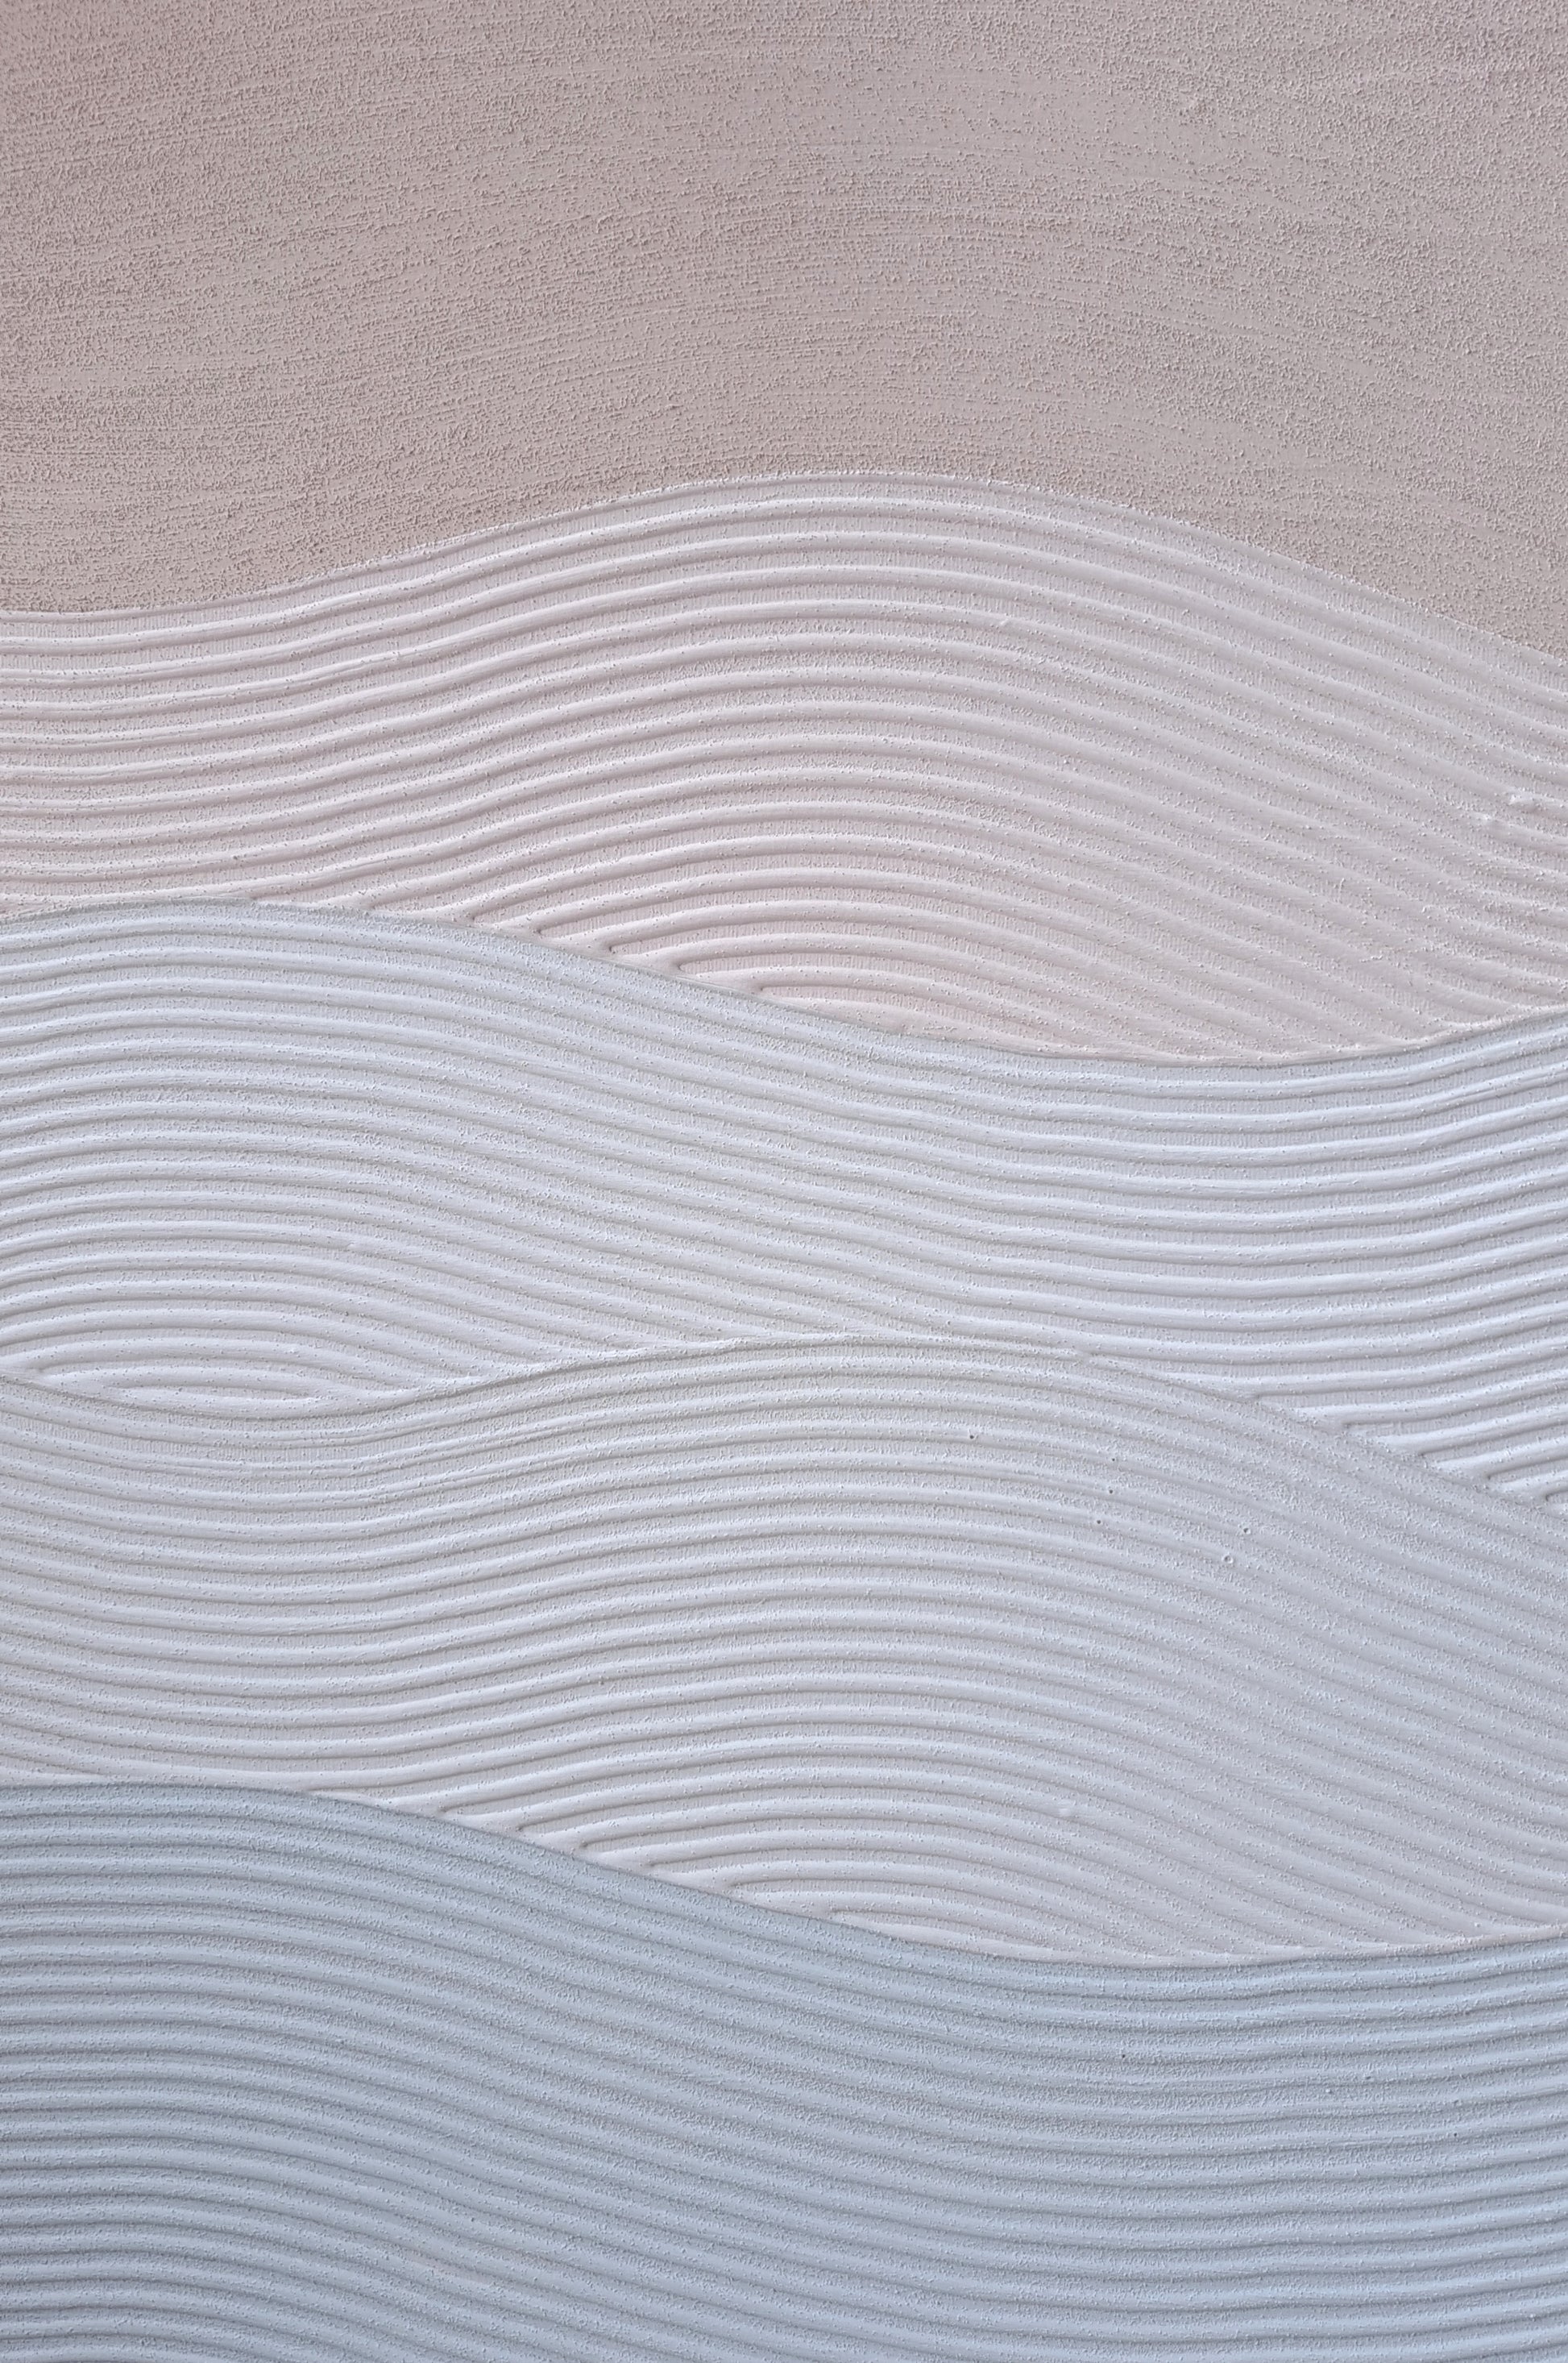 This gradient wave textured piece is made with sand for an authentic beachy feel. Highly textured, with colours ranging from light beige to light blue.